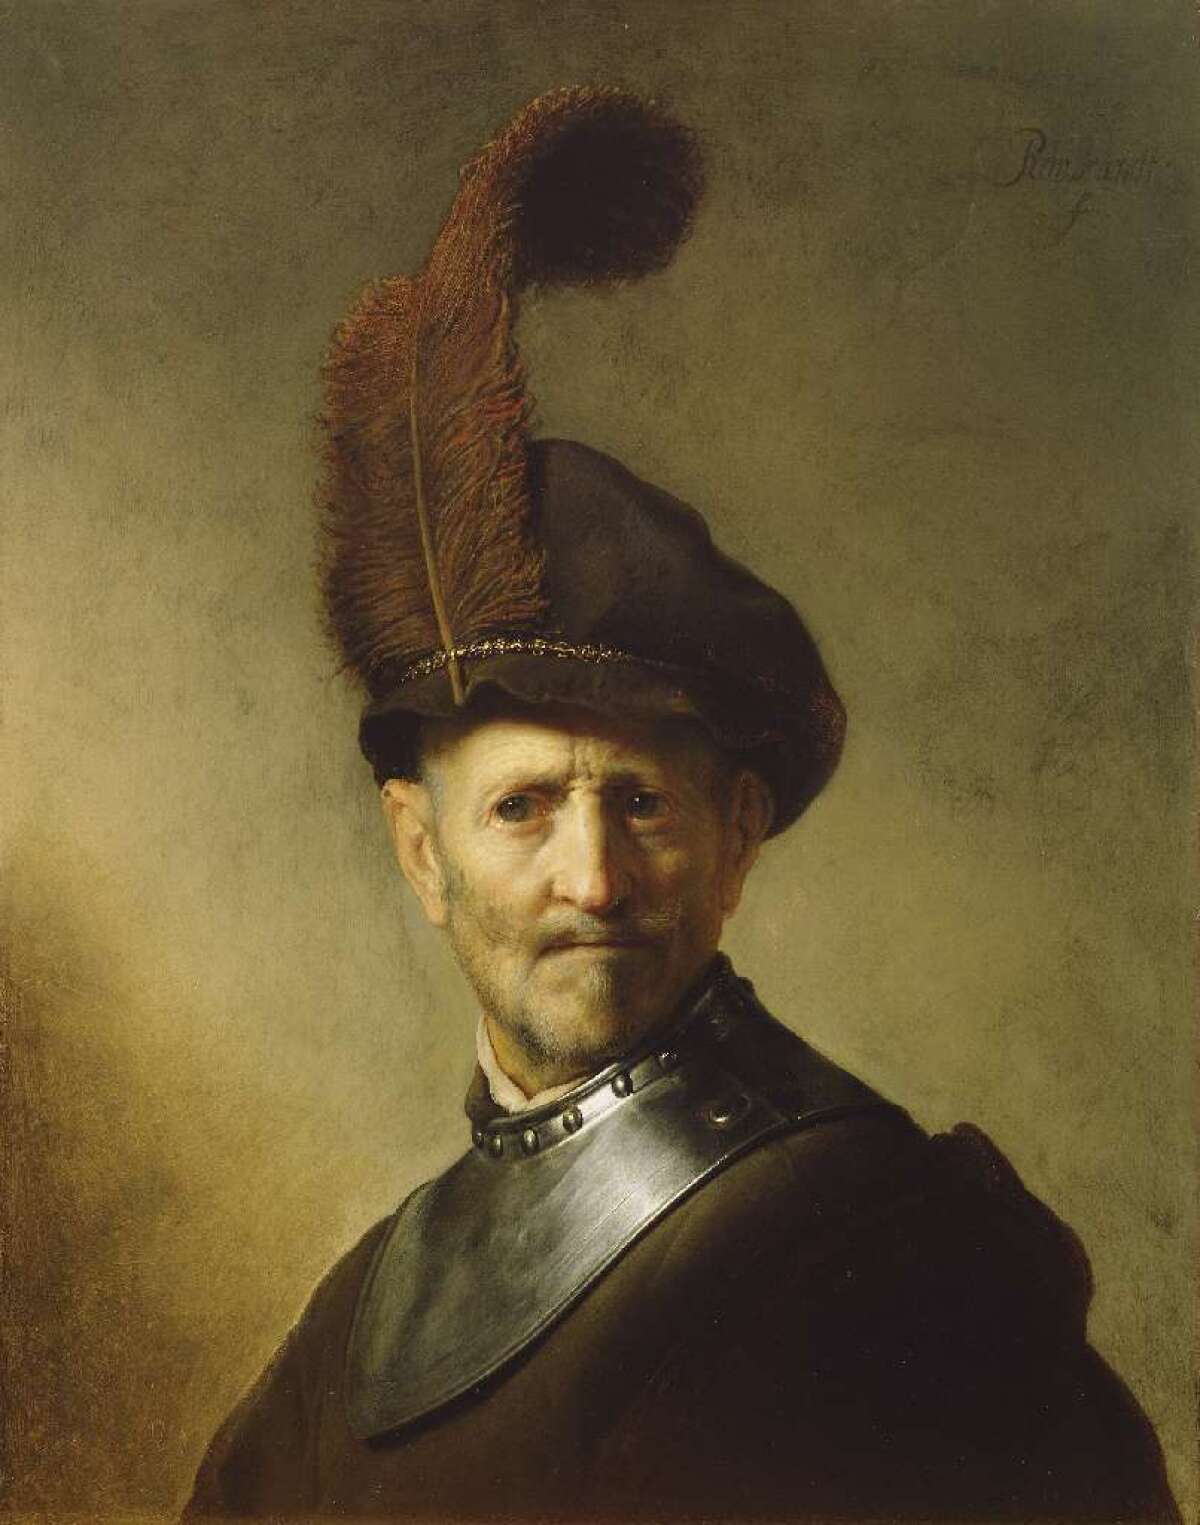 Rembrandt's "An Old Man in Military Costume" hangs at the Getty Museum, which has been trying to learn more about the portrait of a much younger man that's hidden beneath it. A new study using advanced X-ray technology gives a clearer picture of the hidden picture.